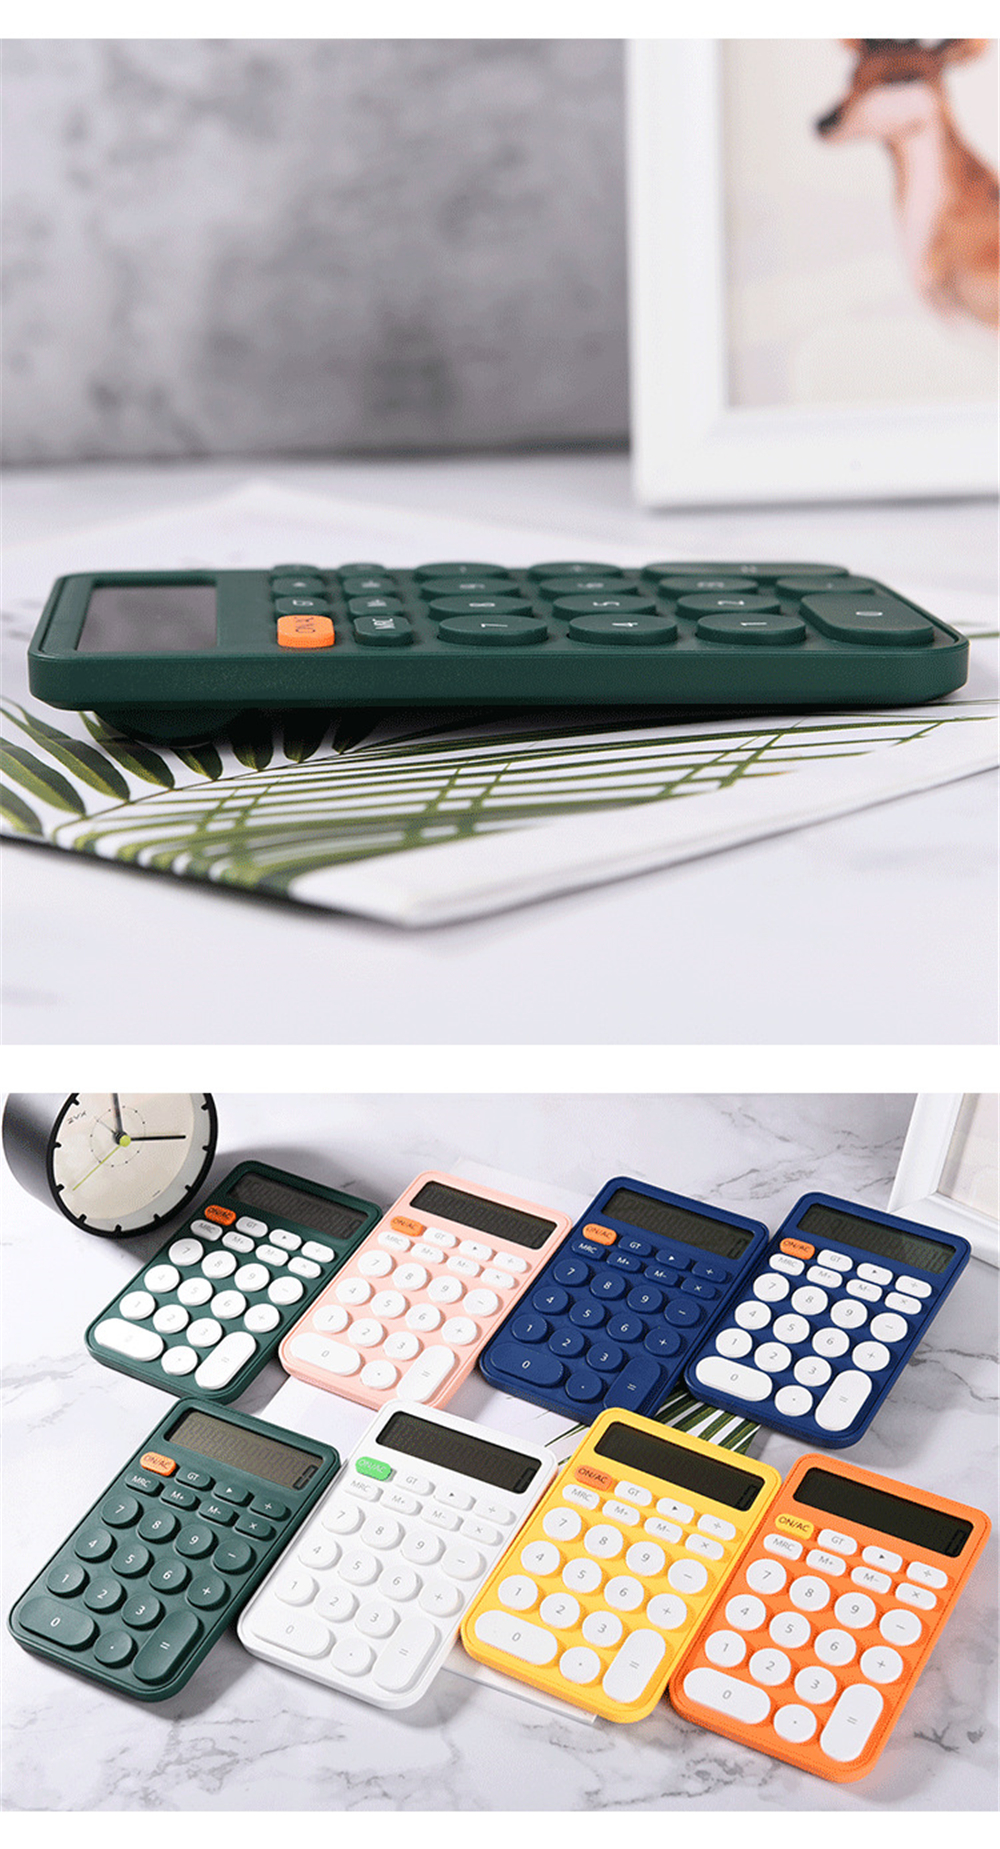 12-Digit-Calculator-Large-Screen-Ultra-Thin-Financial-Office-Accounting-Calculator-Portable-Statione-1794249-15